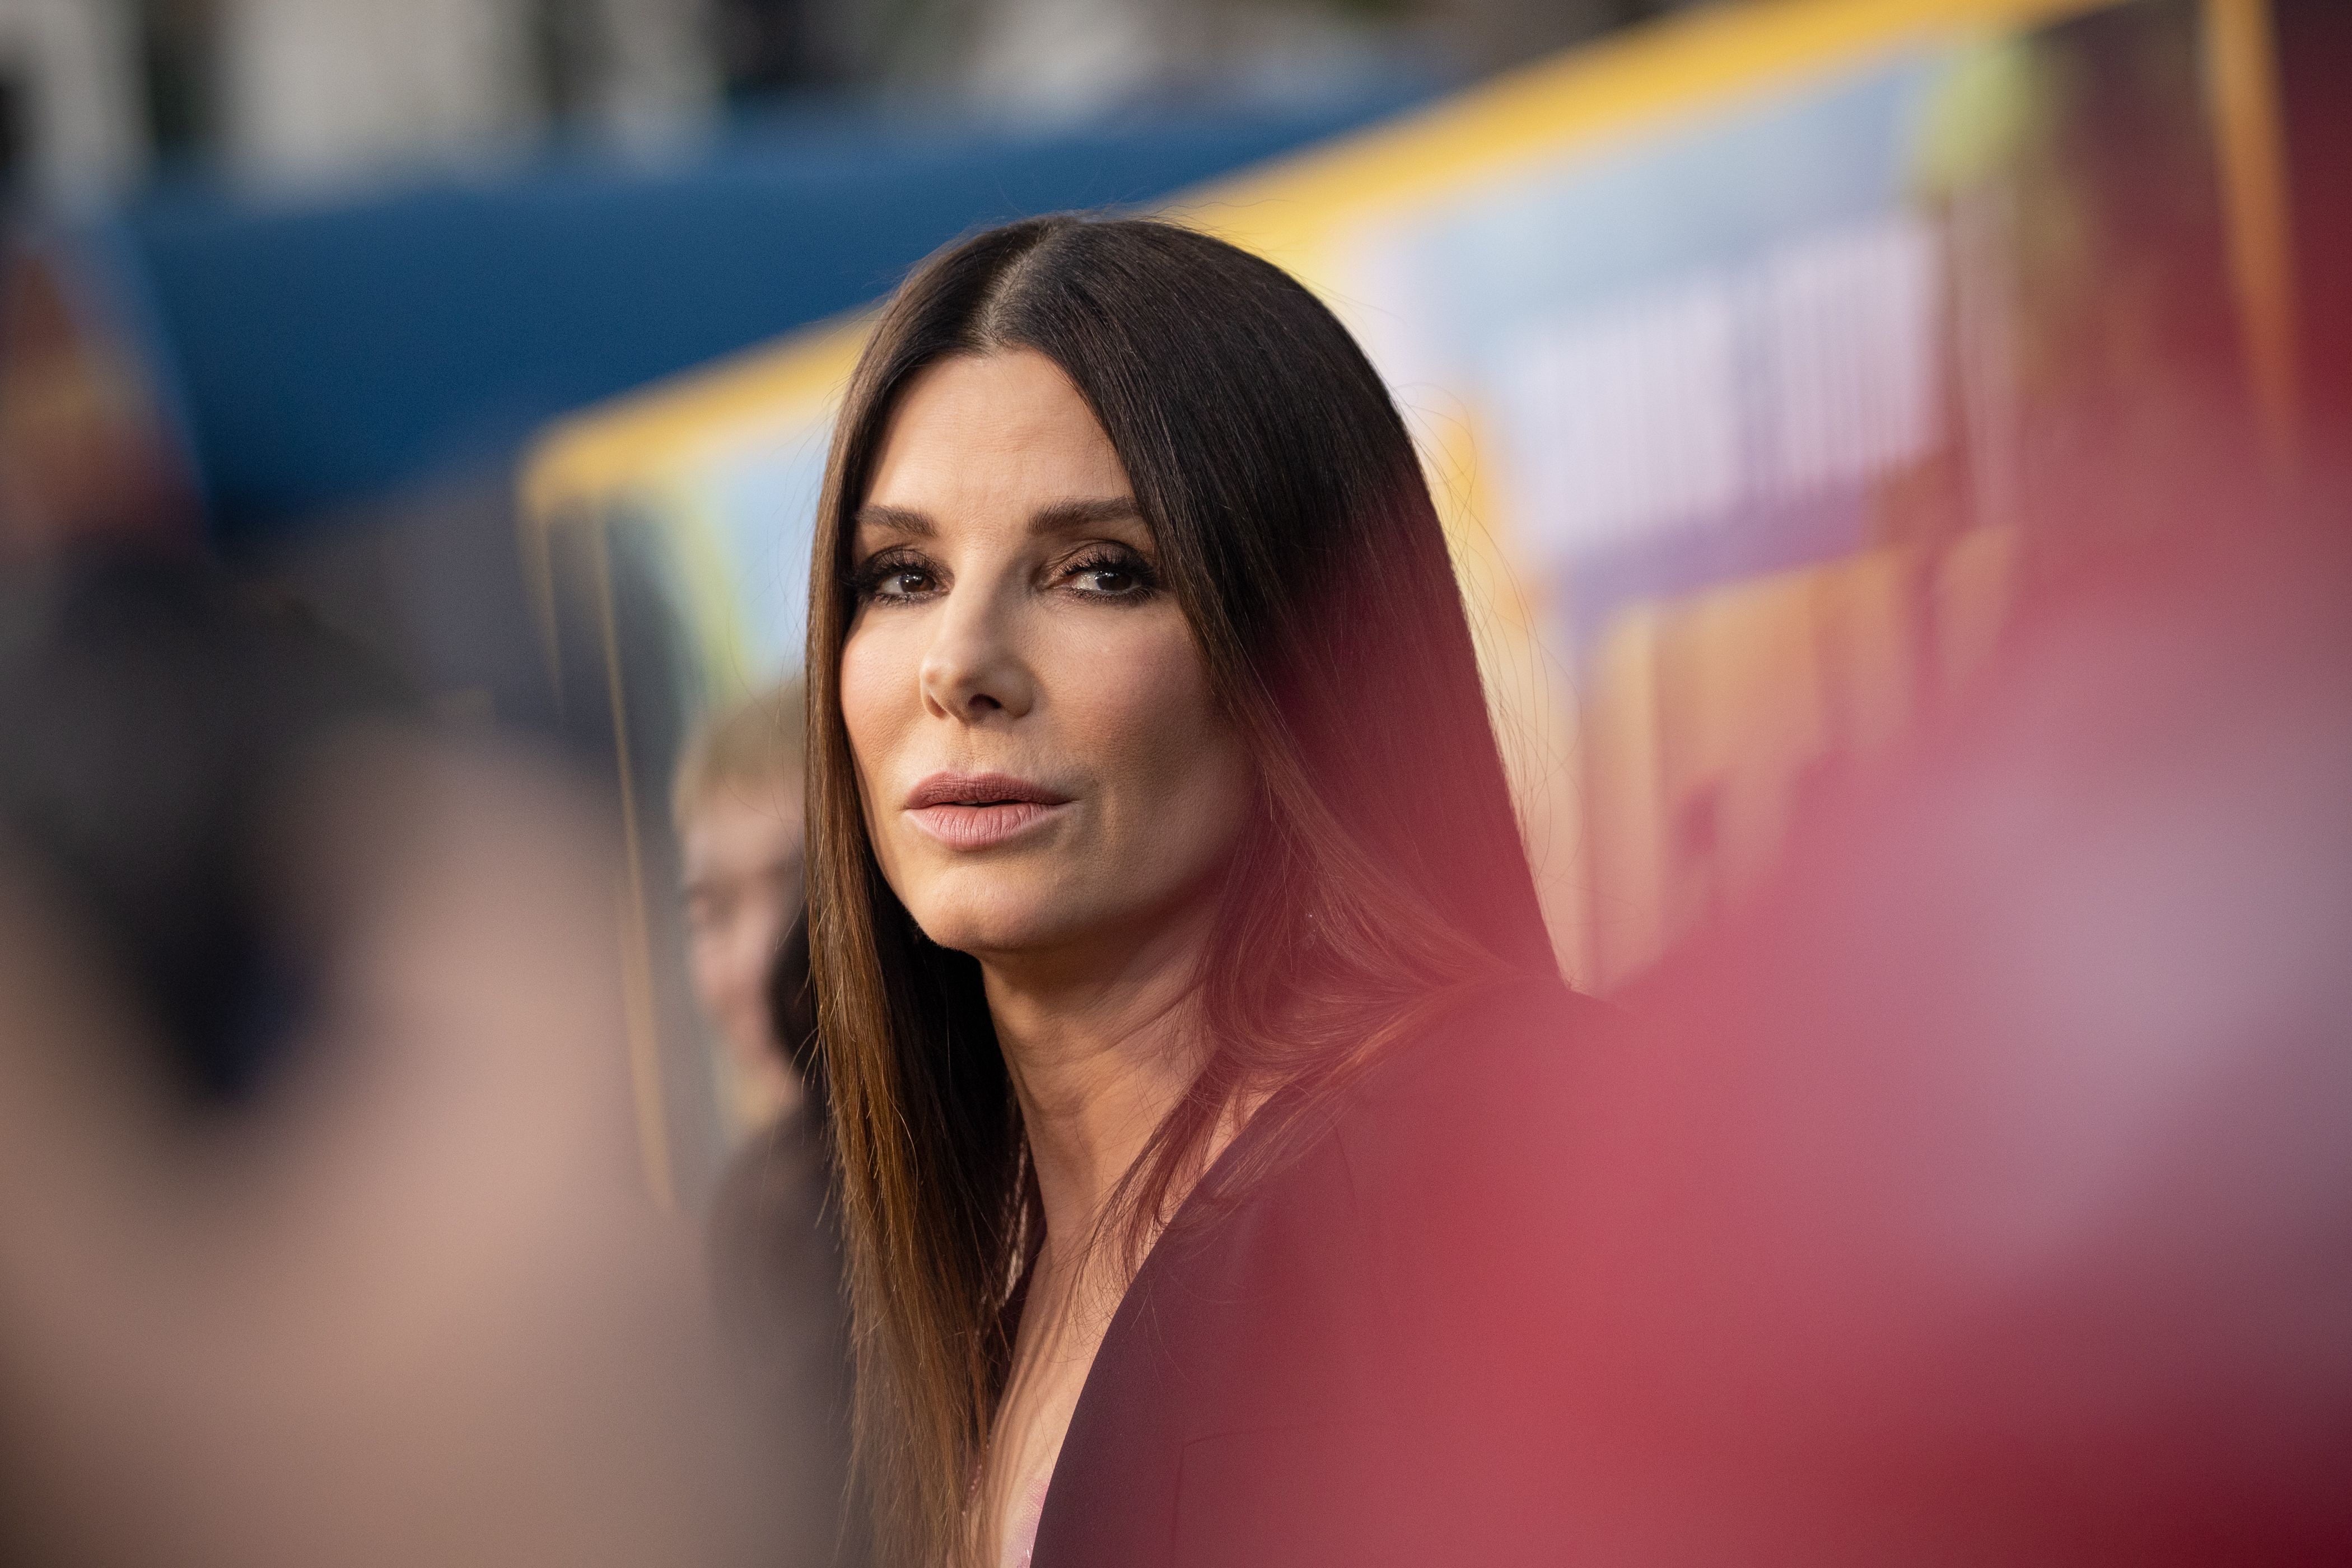 Sandra Bullock attends the Los Angeles premiere of "The Lost City" at Regency Village Theatre on March 21, 2022 in Los Angeles, California | Source: Getty Images